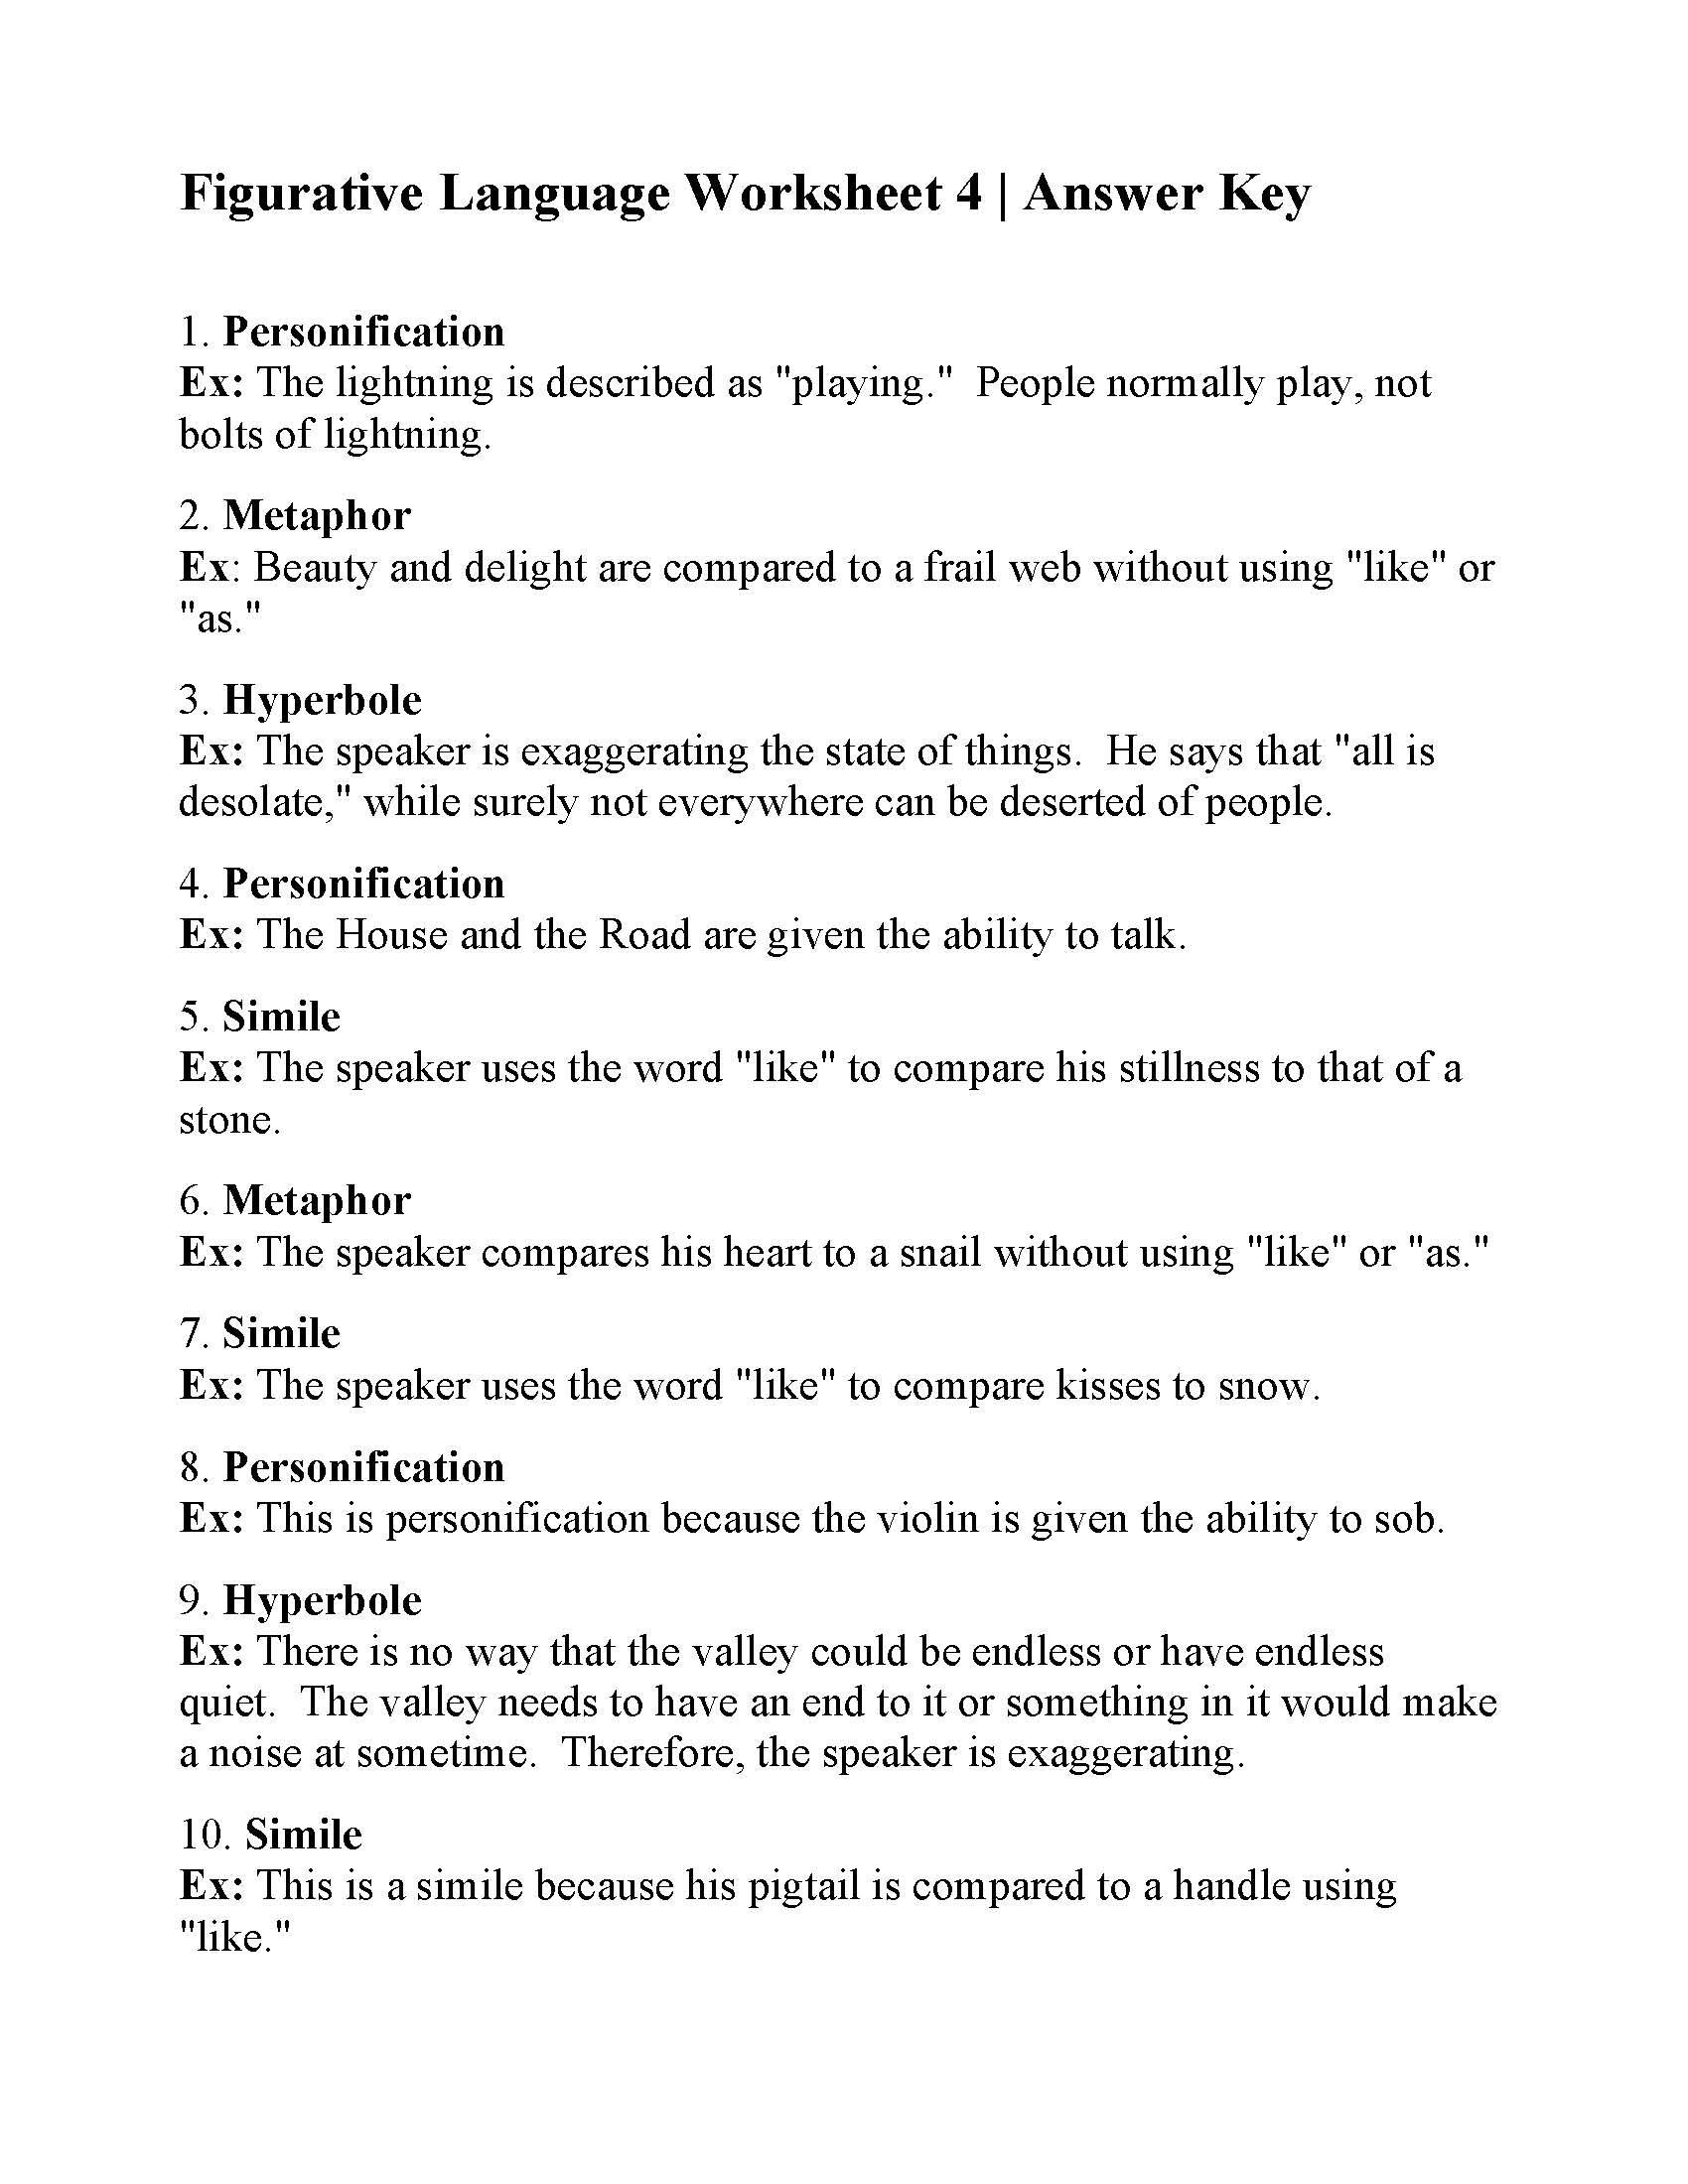 This is a preview image of Figurative Language Worksheet 4. Click on it to enlarge it or view the source file.